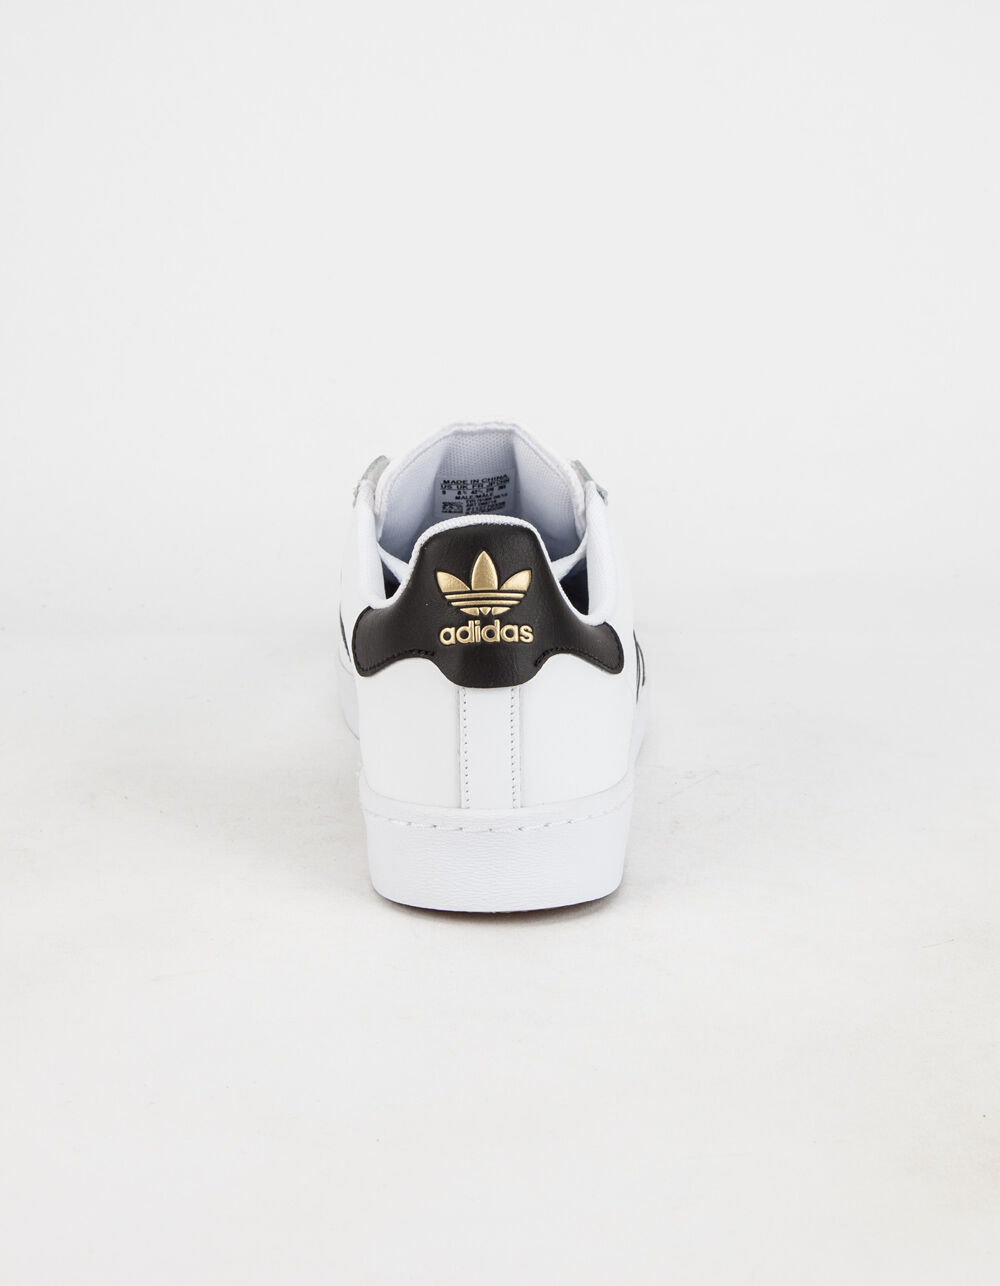 ADIDAS Superstar Vulc ADV Shoes image number 4